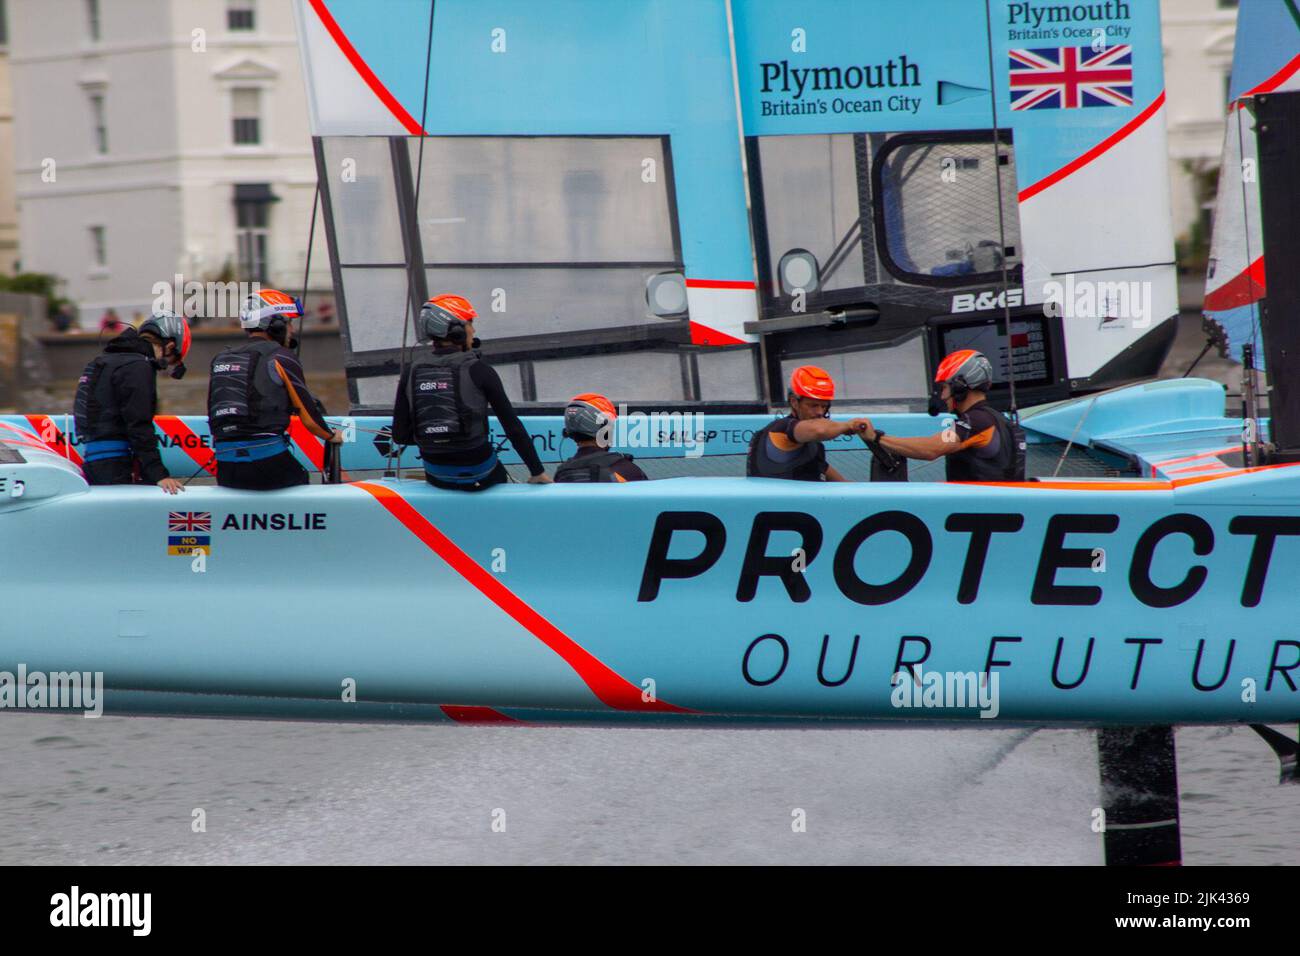 SailGP, Plymouth, UK. 30th July, 2022. Day 1 for the Great British Sail Grand Prix, as Britain's Ocean City hosts the third event of Season 3 as the most competitive racing on water. The event returns to Plymouth on 30-31 July. Credit: Julian Kemp/Alamy Live News Stock Photo